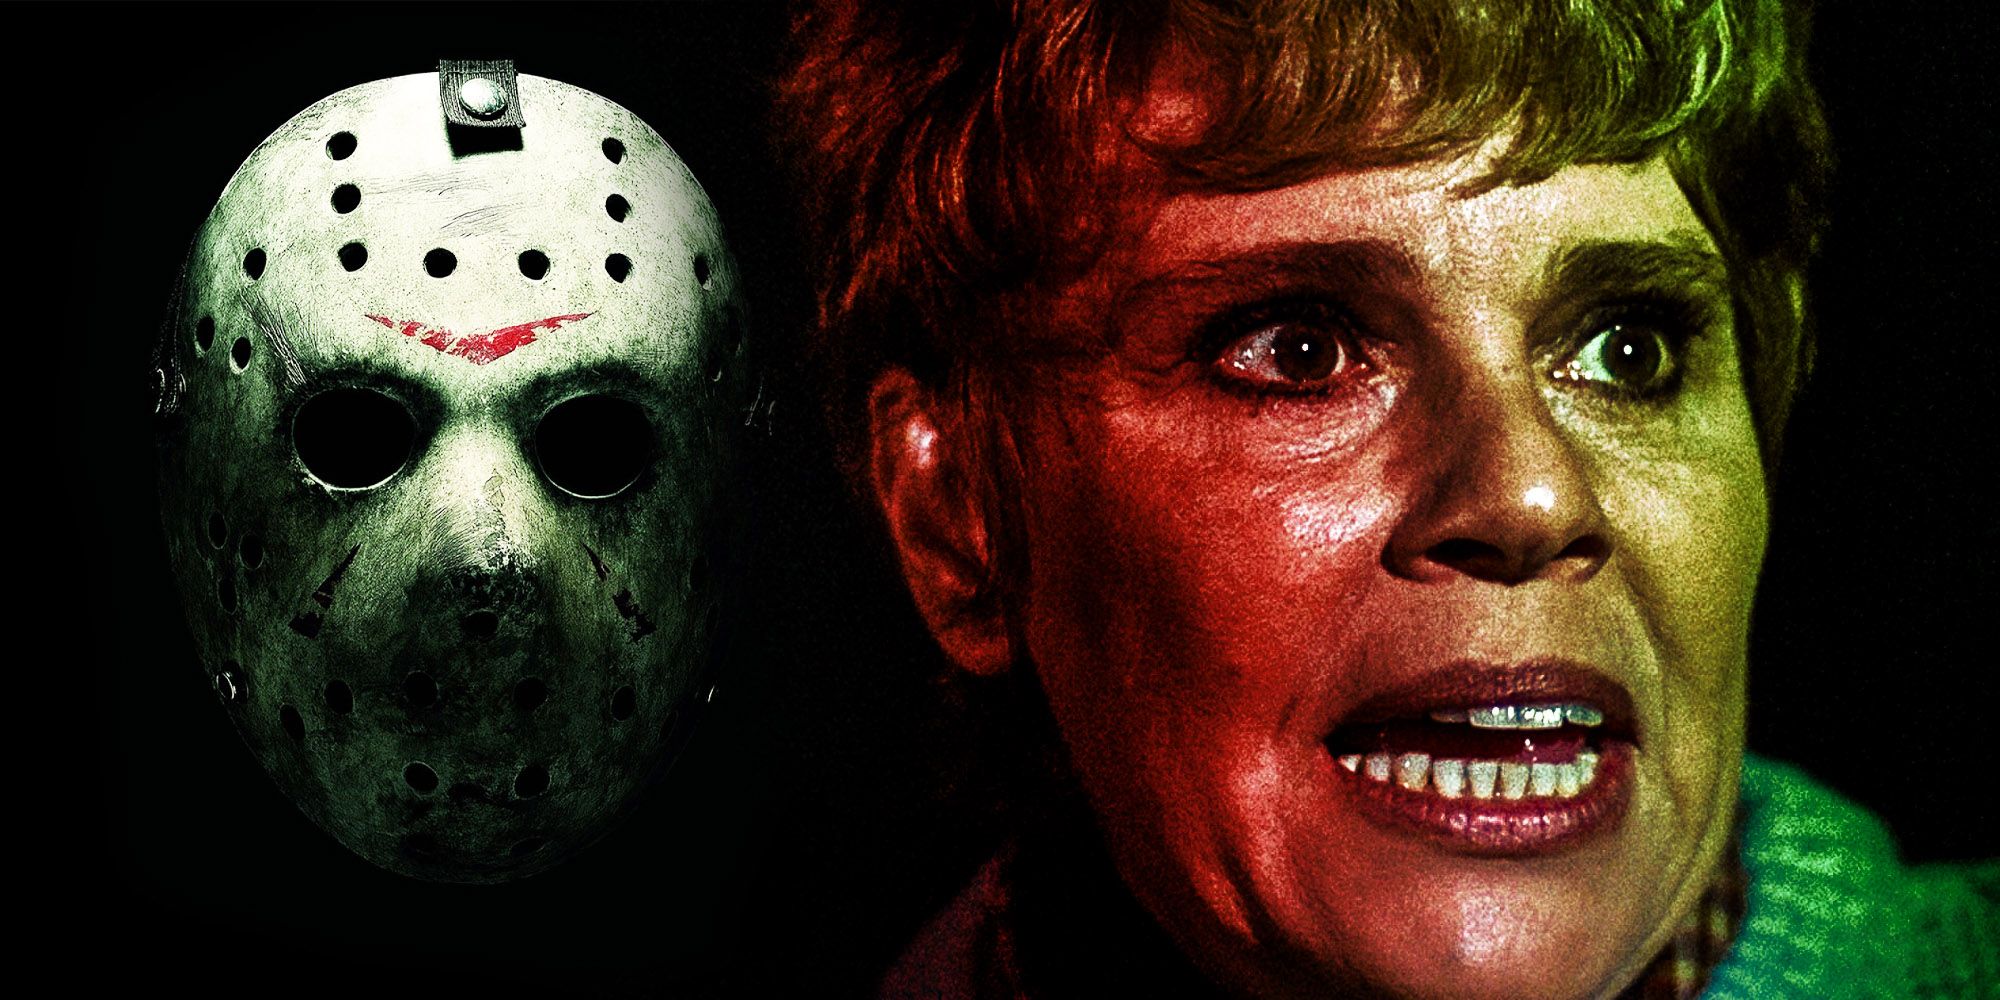 Mrs Voorhees Friday the 13th original clues